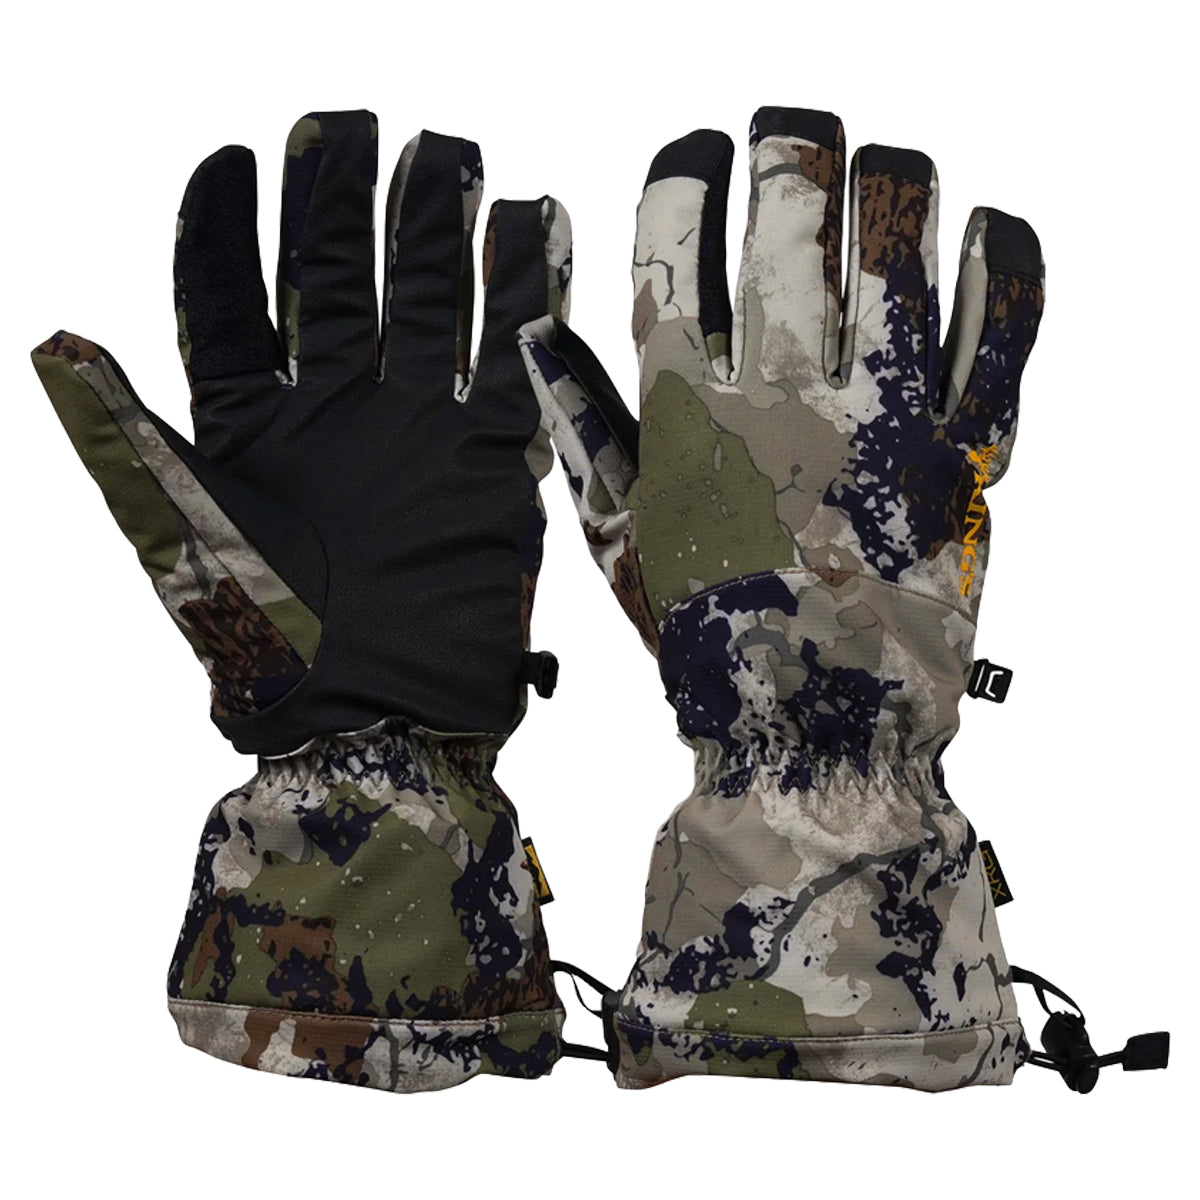 King's XKG Insulated Glove in XK7 by GOHUNT | King's - GOHUNT Shop